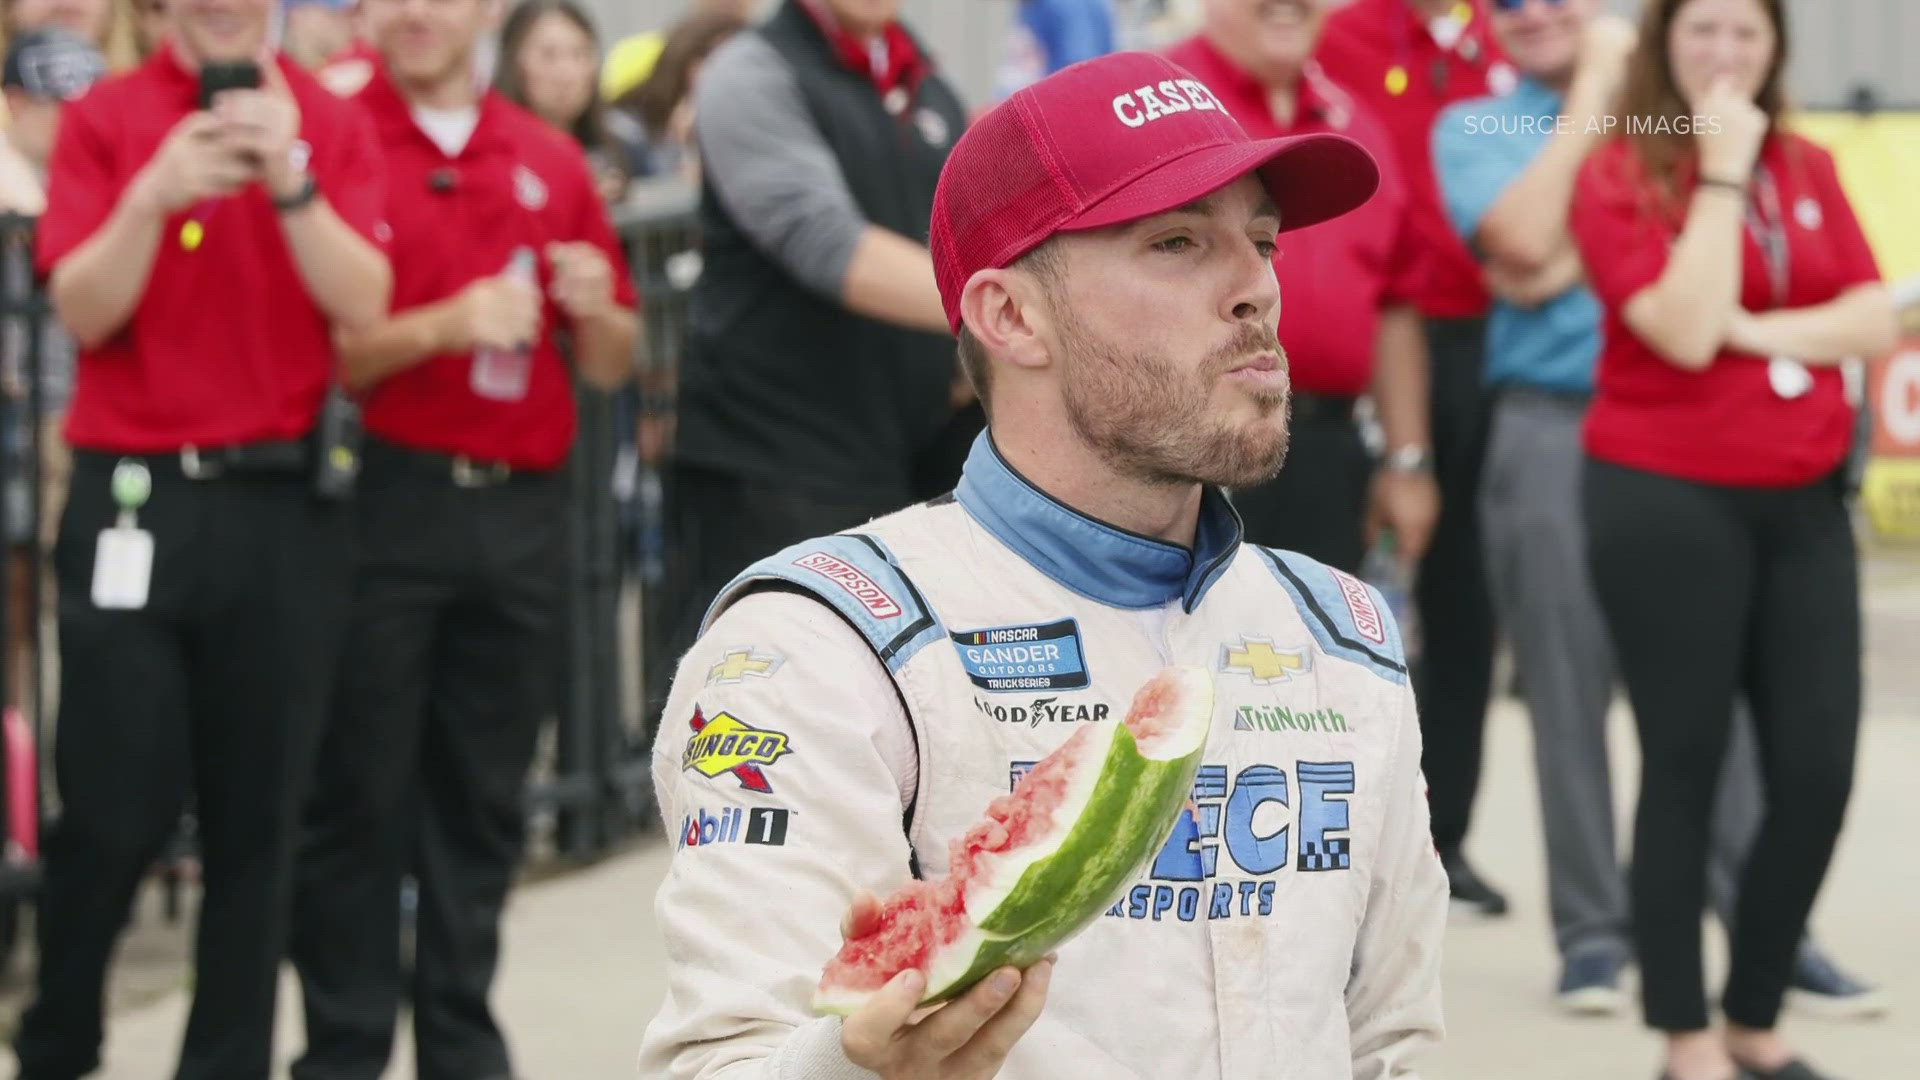 It's watermelon season, and Ross Chastain says his dad will haul a fresh melon from their family farm to the Coca-Cola 600 in case there's a win in his future!